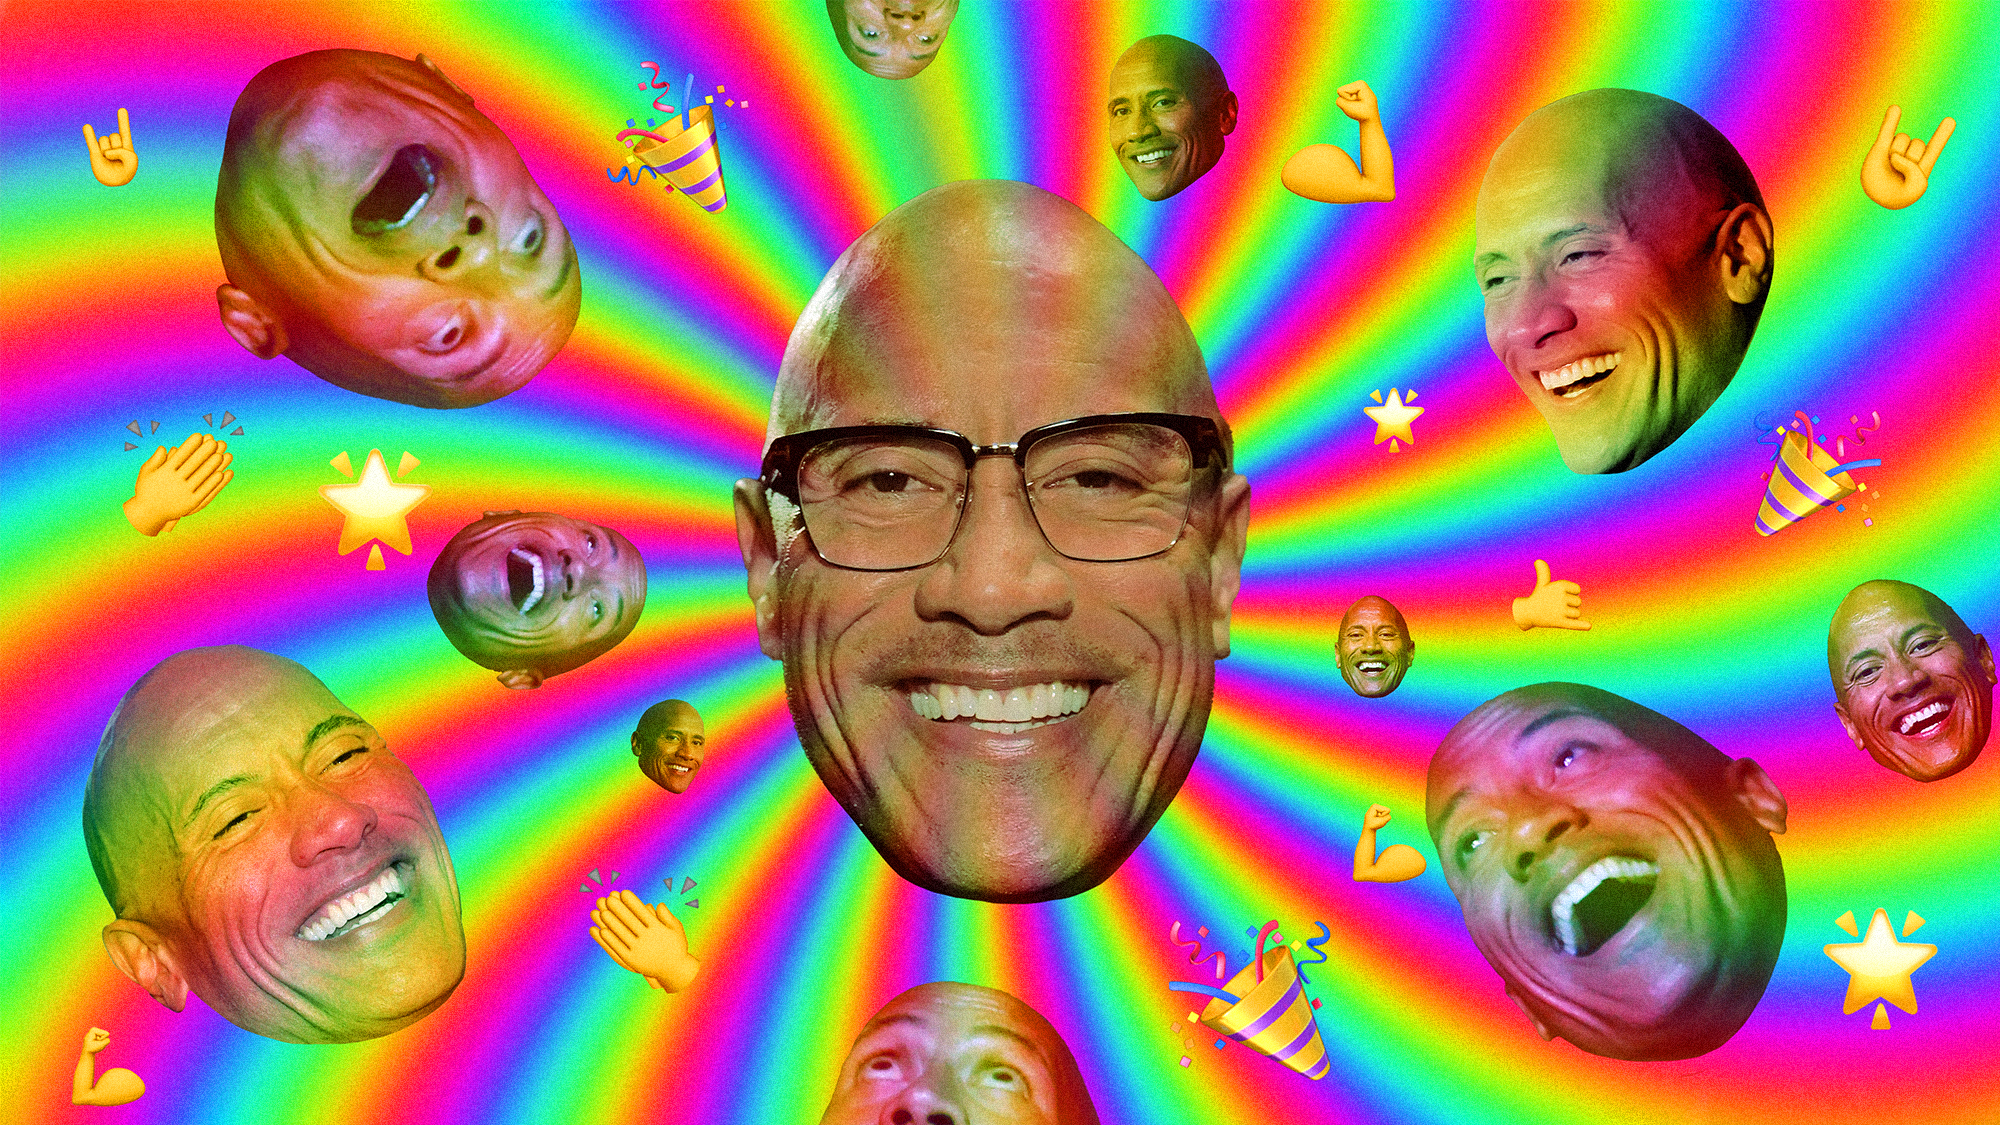 A rainbow image with multiple faces of Dwayne Johnson